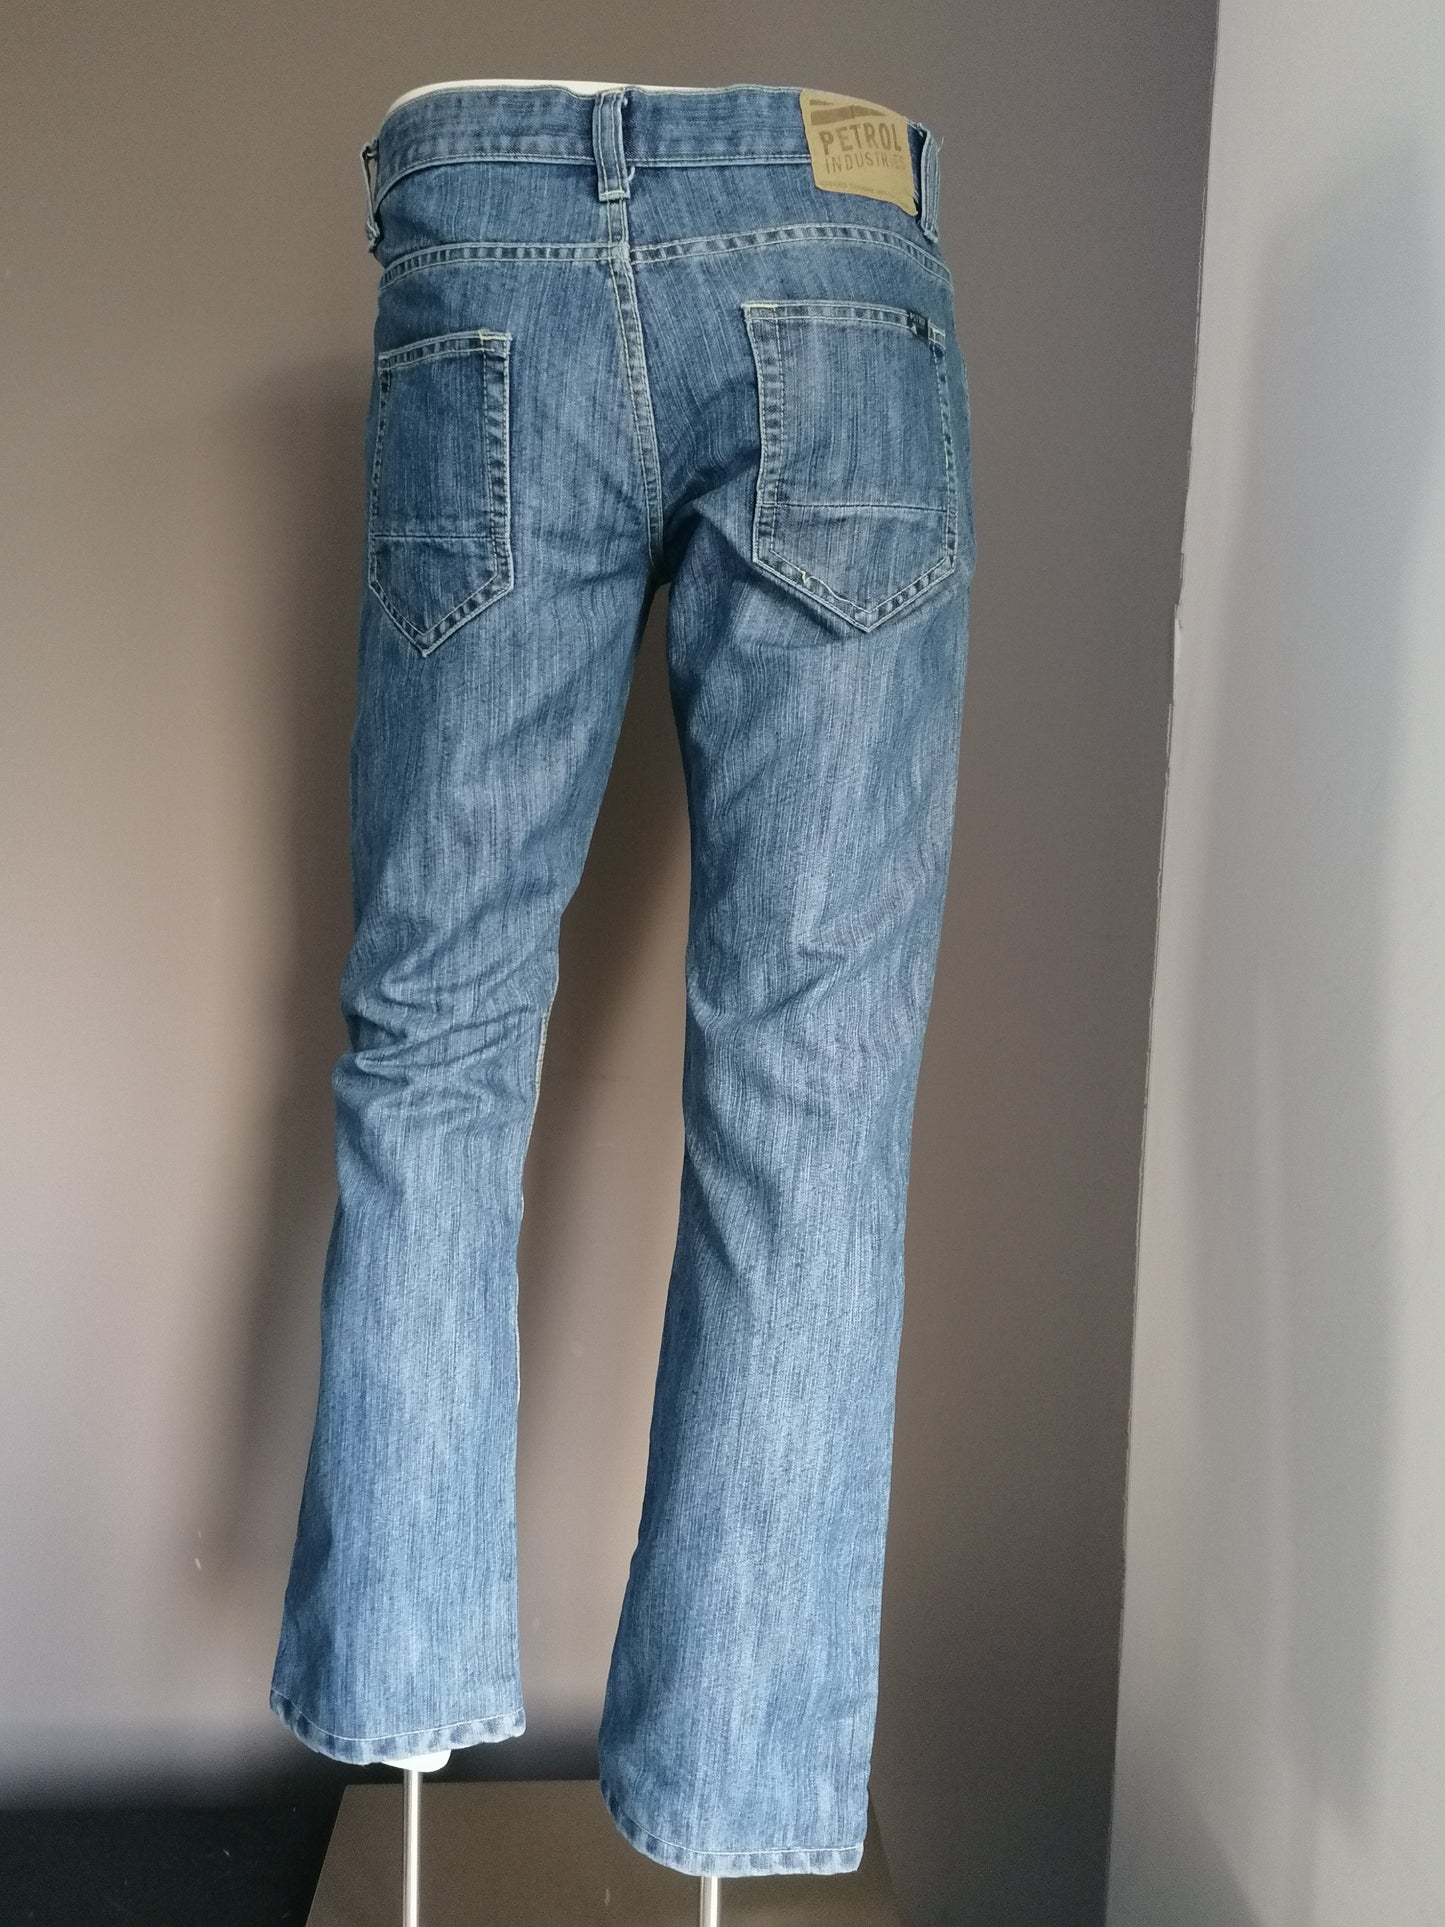 Petrol jeans. Colored blue. Size W32 - 30. Pants have been shortened.